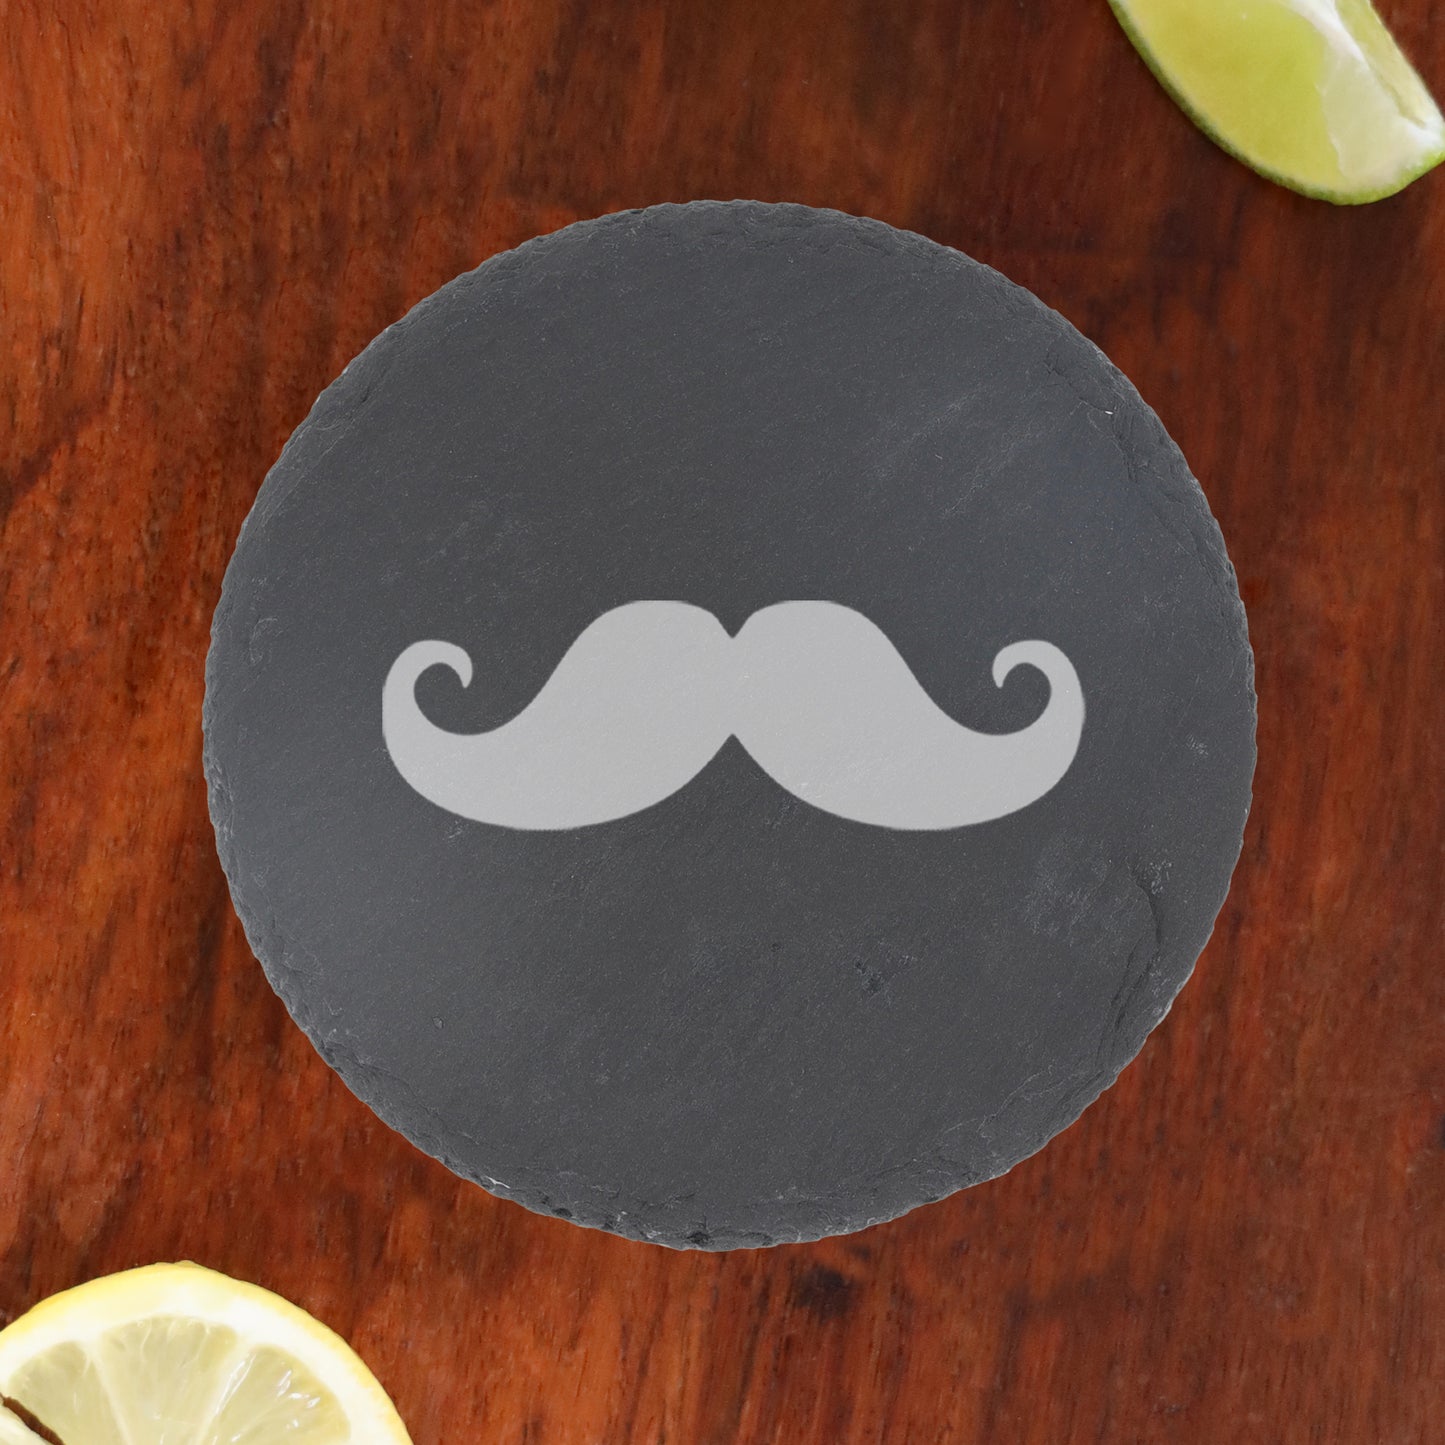 Engraved Funny Gift for Men Moustache Whisky Glass and/or Coaster Set  - Always Looking Good - Round Coaster Only  